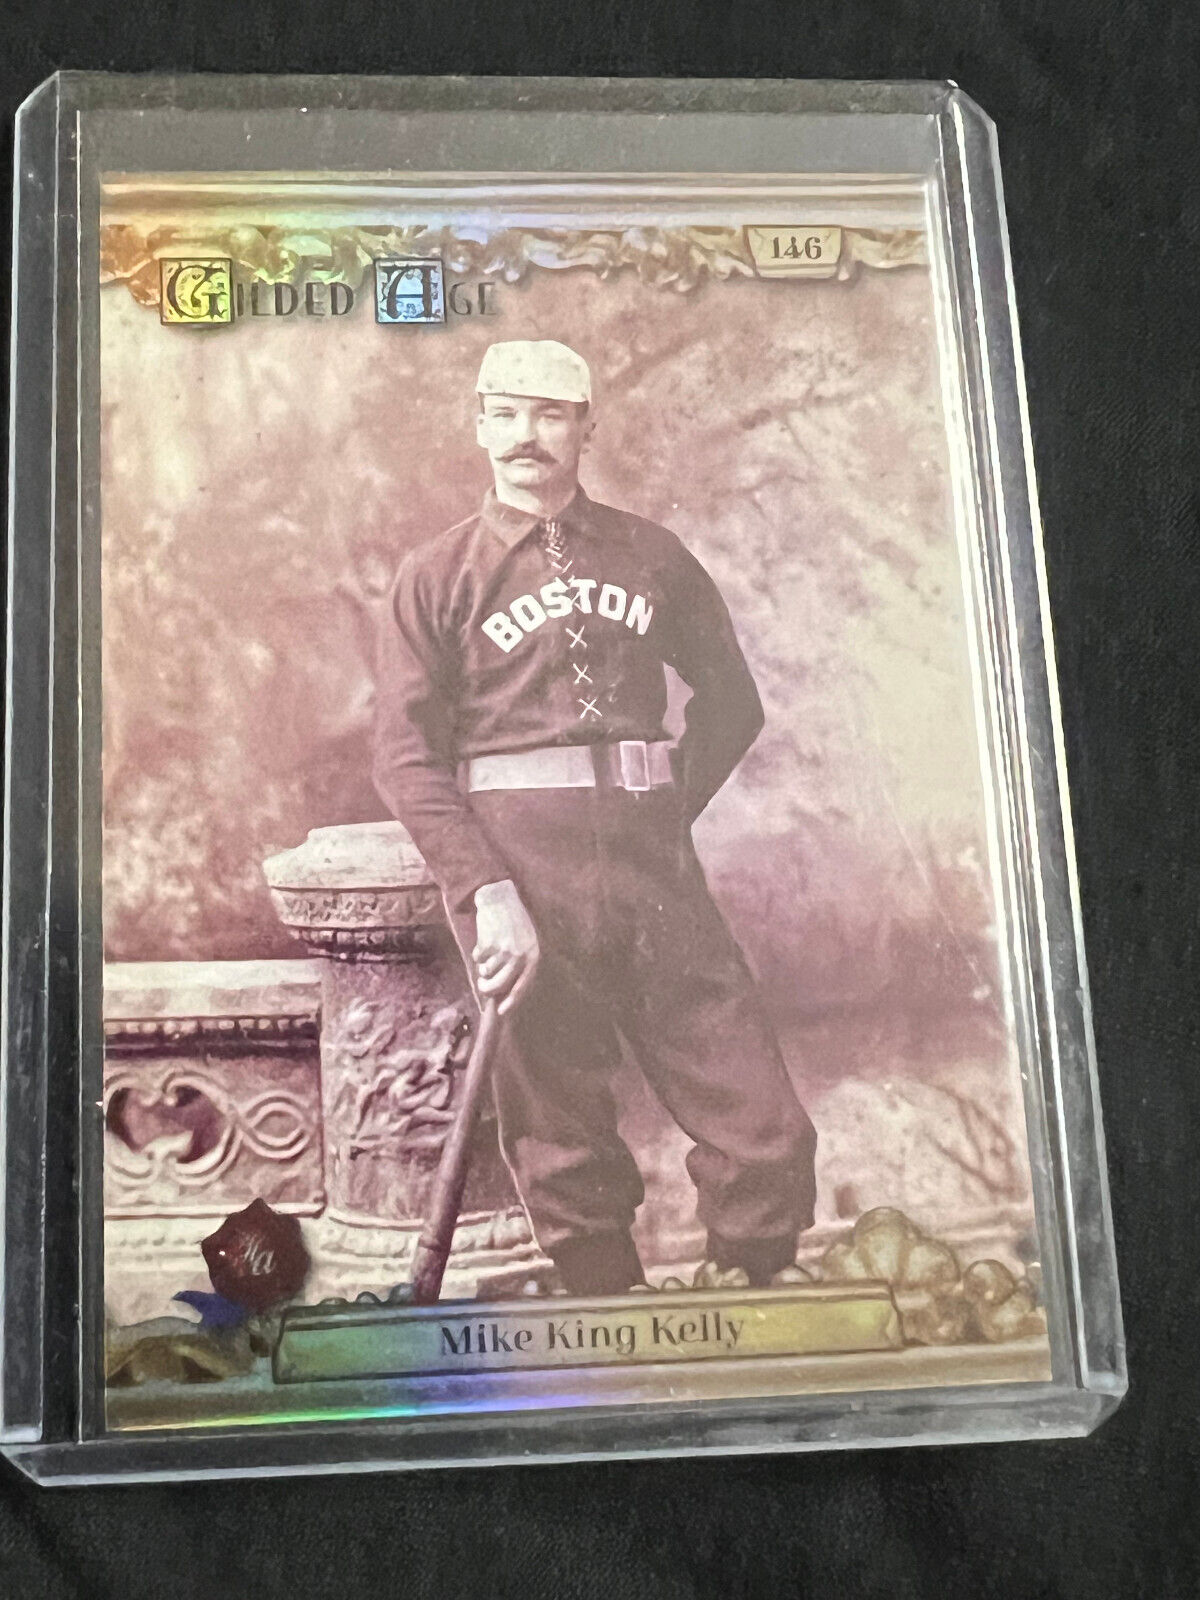 Mike King Kelly 2022 Historic Autographs Gilded Age Foil 1 of 149 #146